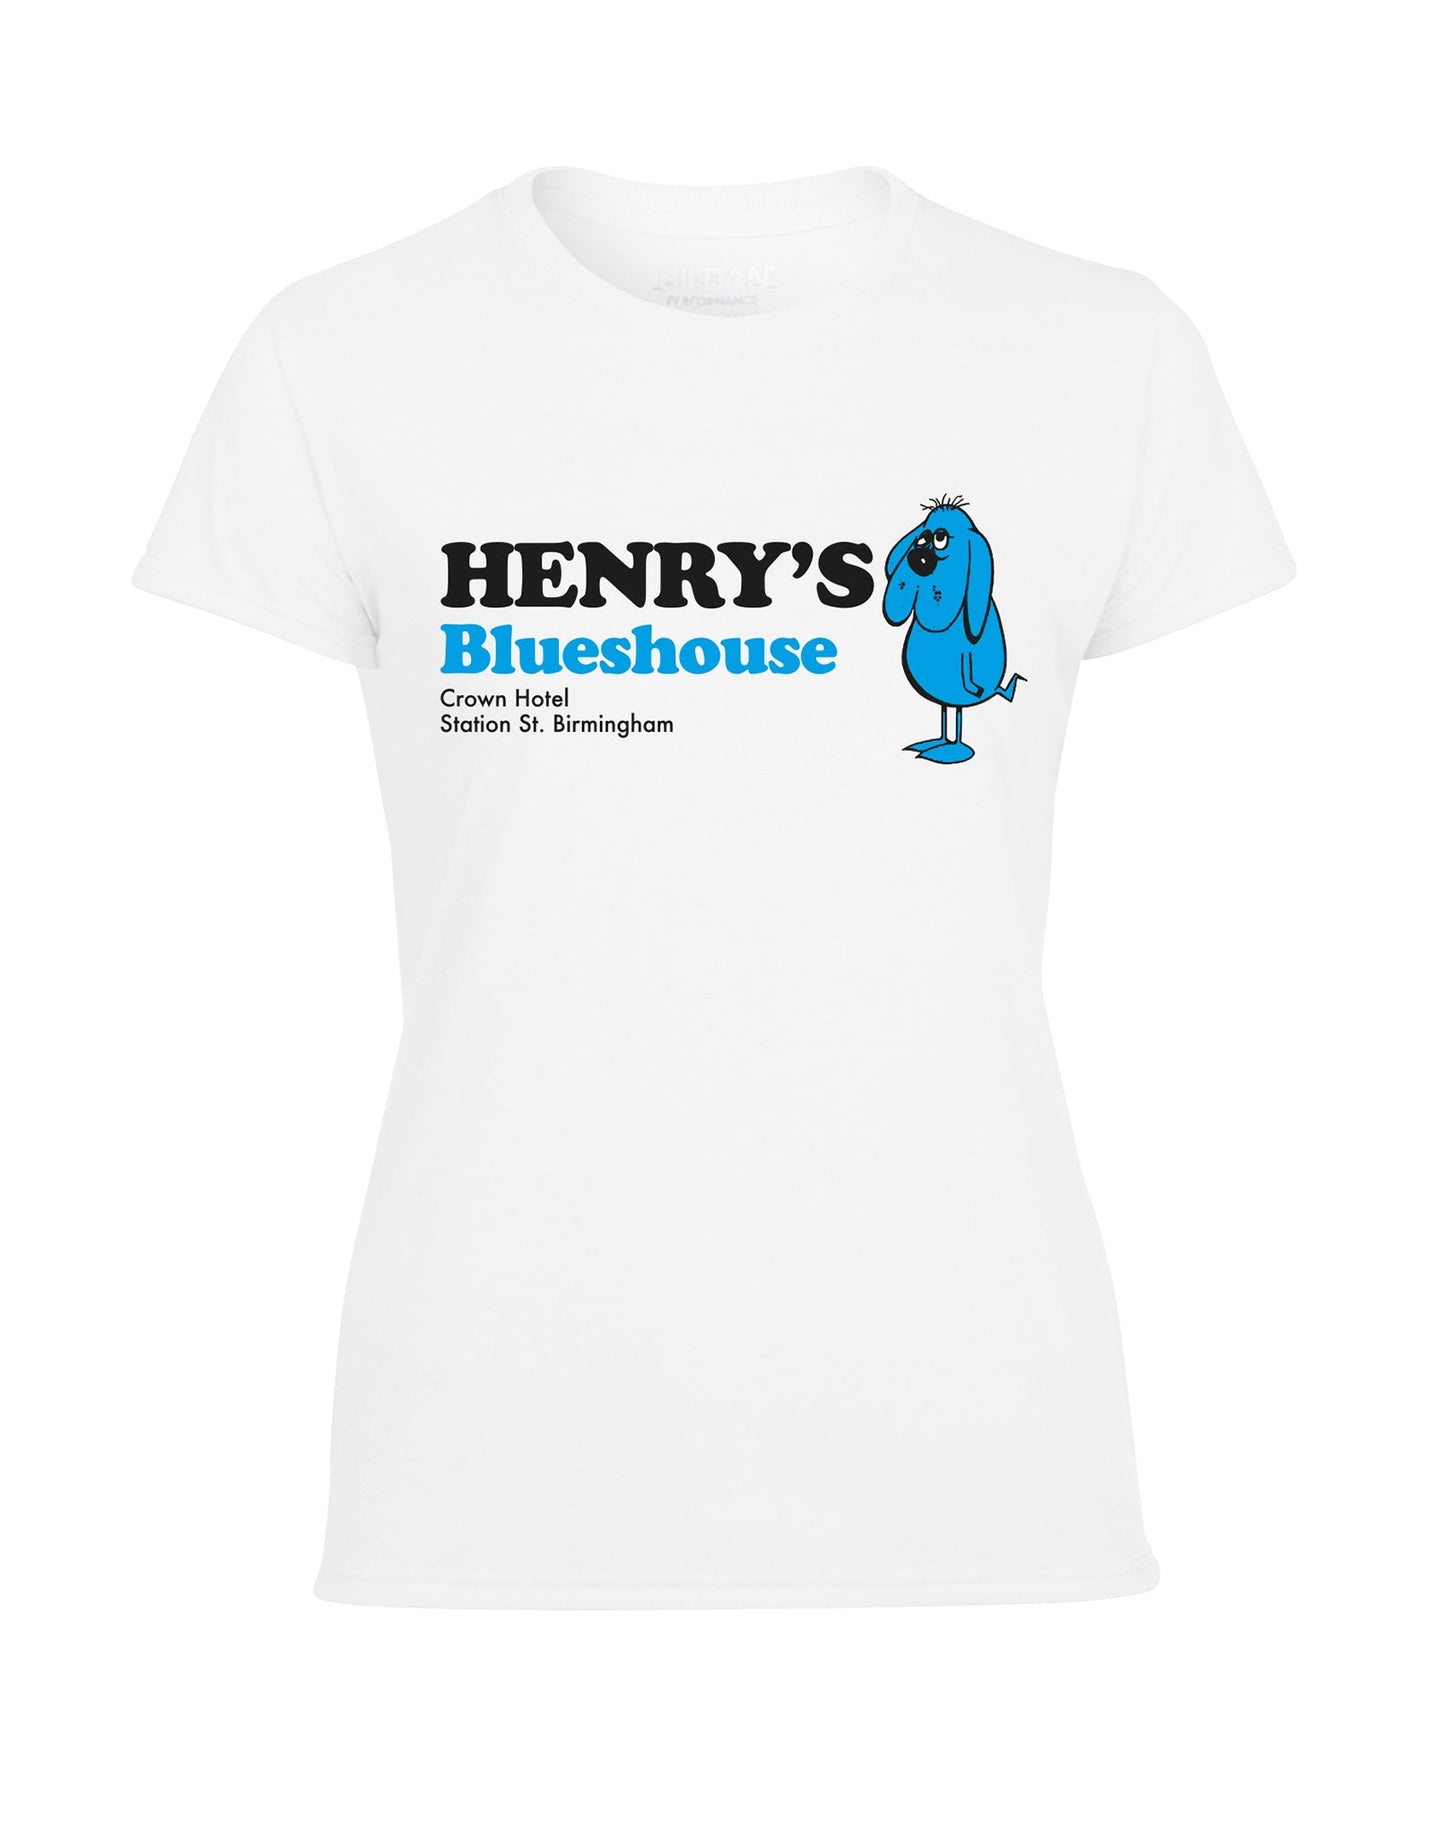 Henry's Blueshouse ladies fit T-shirt - various colours - Dirty Stop Outs